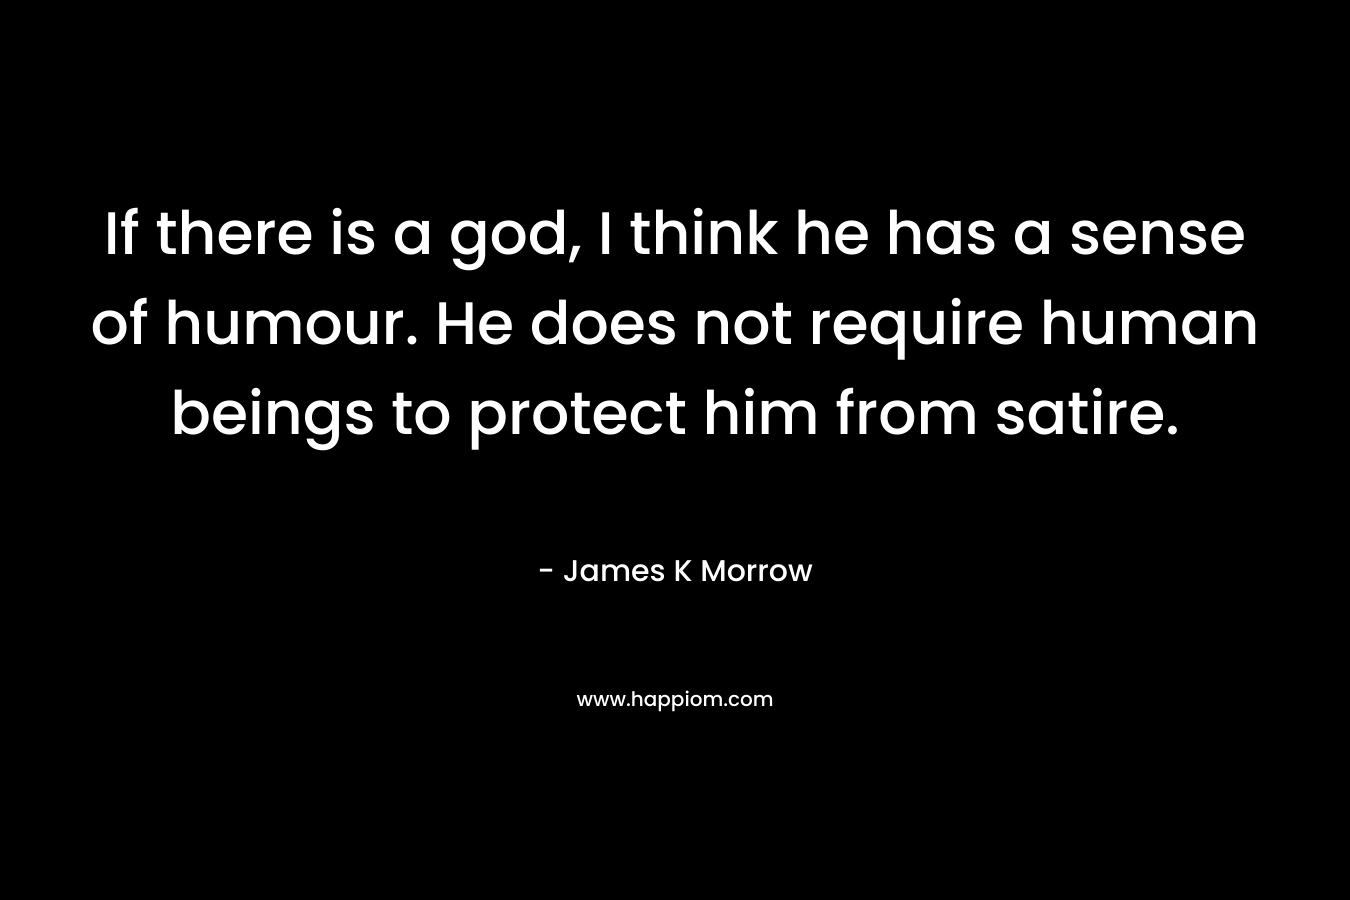 If there is a god, I think he has a sense of humour. He does not require human beings to protect him from satire. – James K Morrow